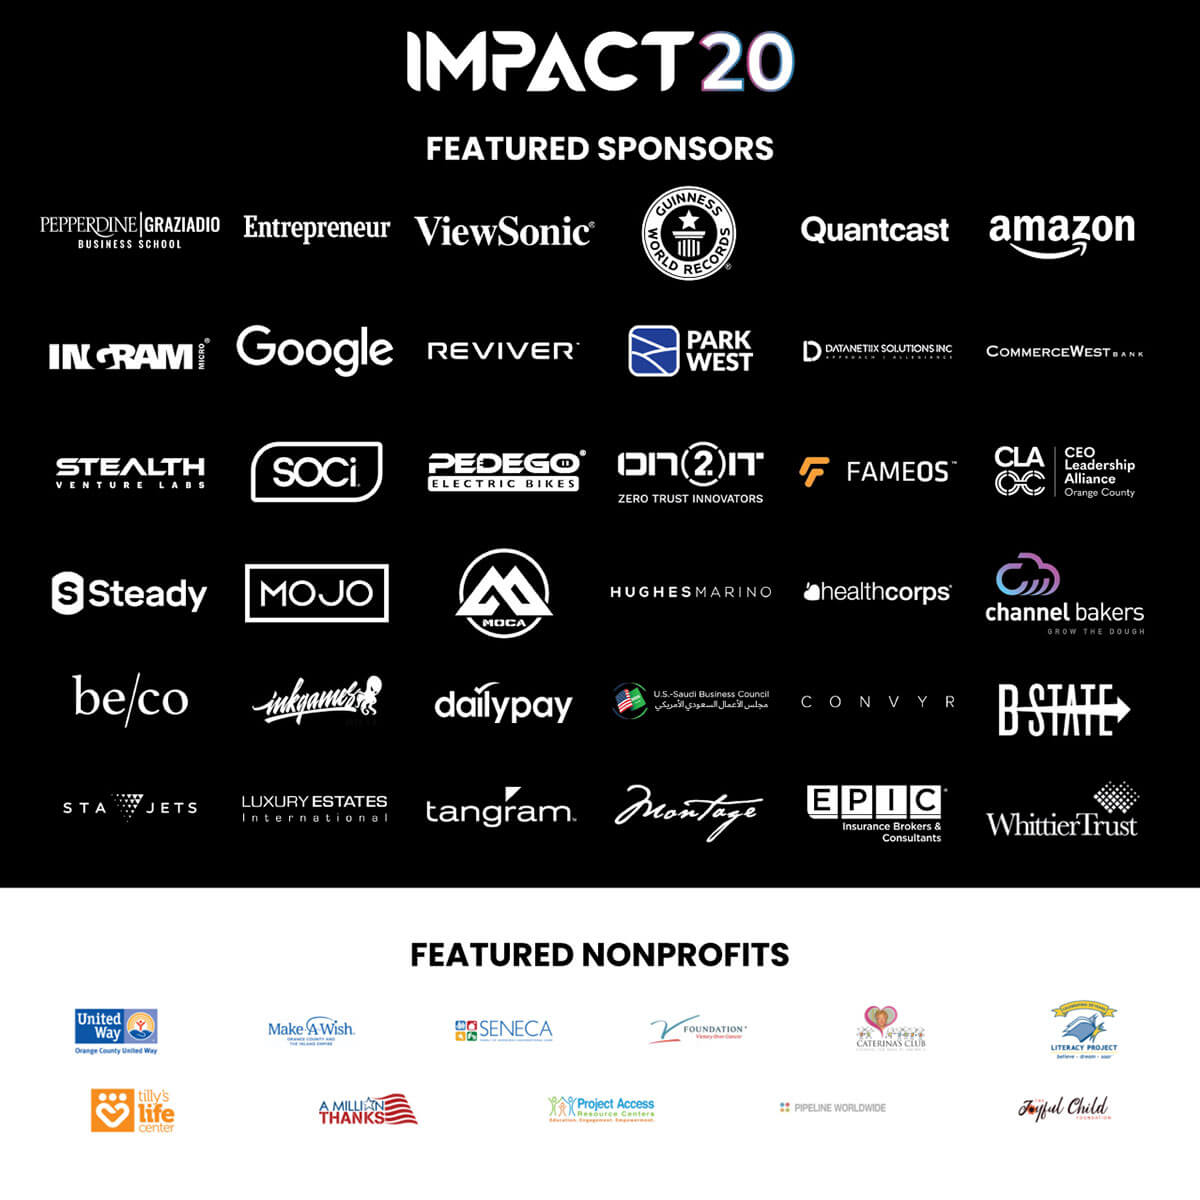 IMPACT 20 Sponsors and Featured Nonprofits